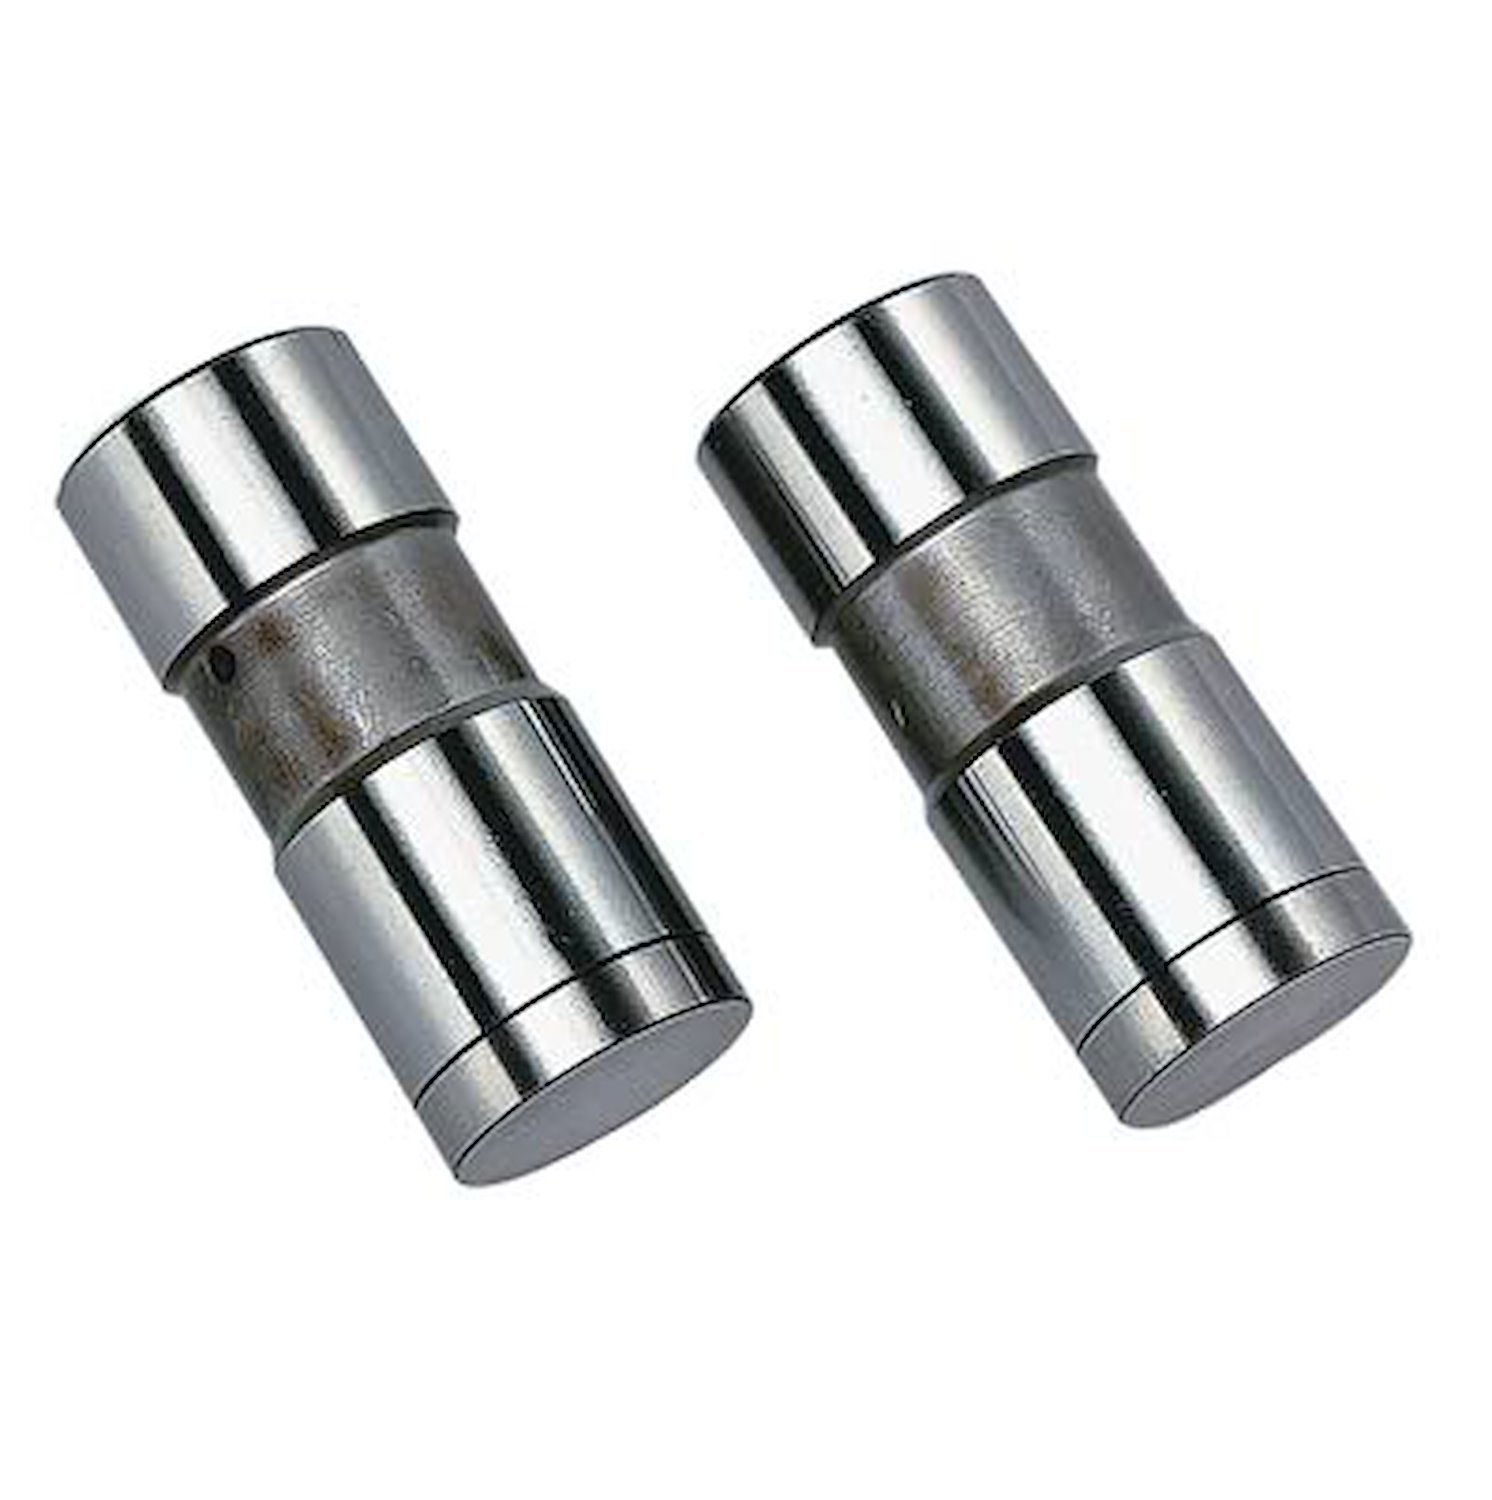 Hydraulic Flat Tappet Lifters for Small Block Chevy, Big Block Chevy, and Chevy 4.3L V6